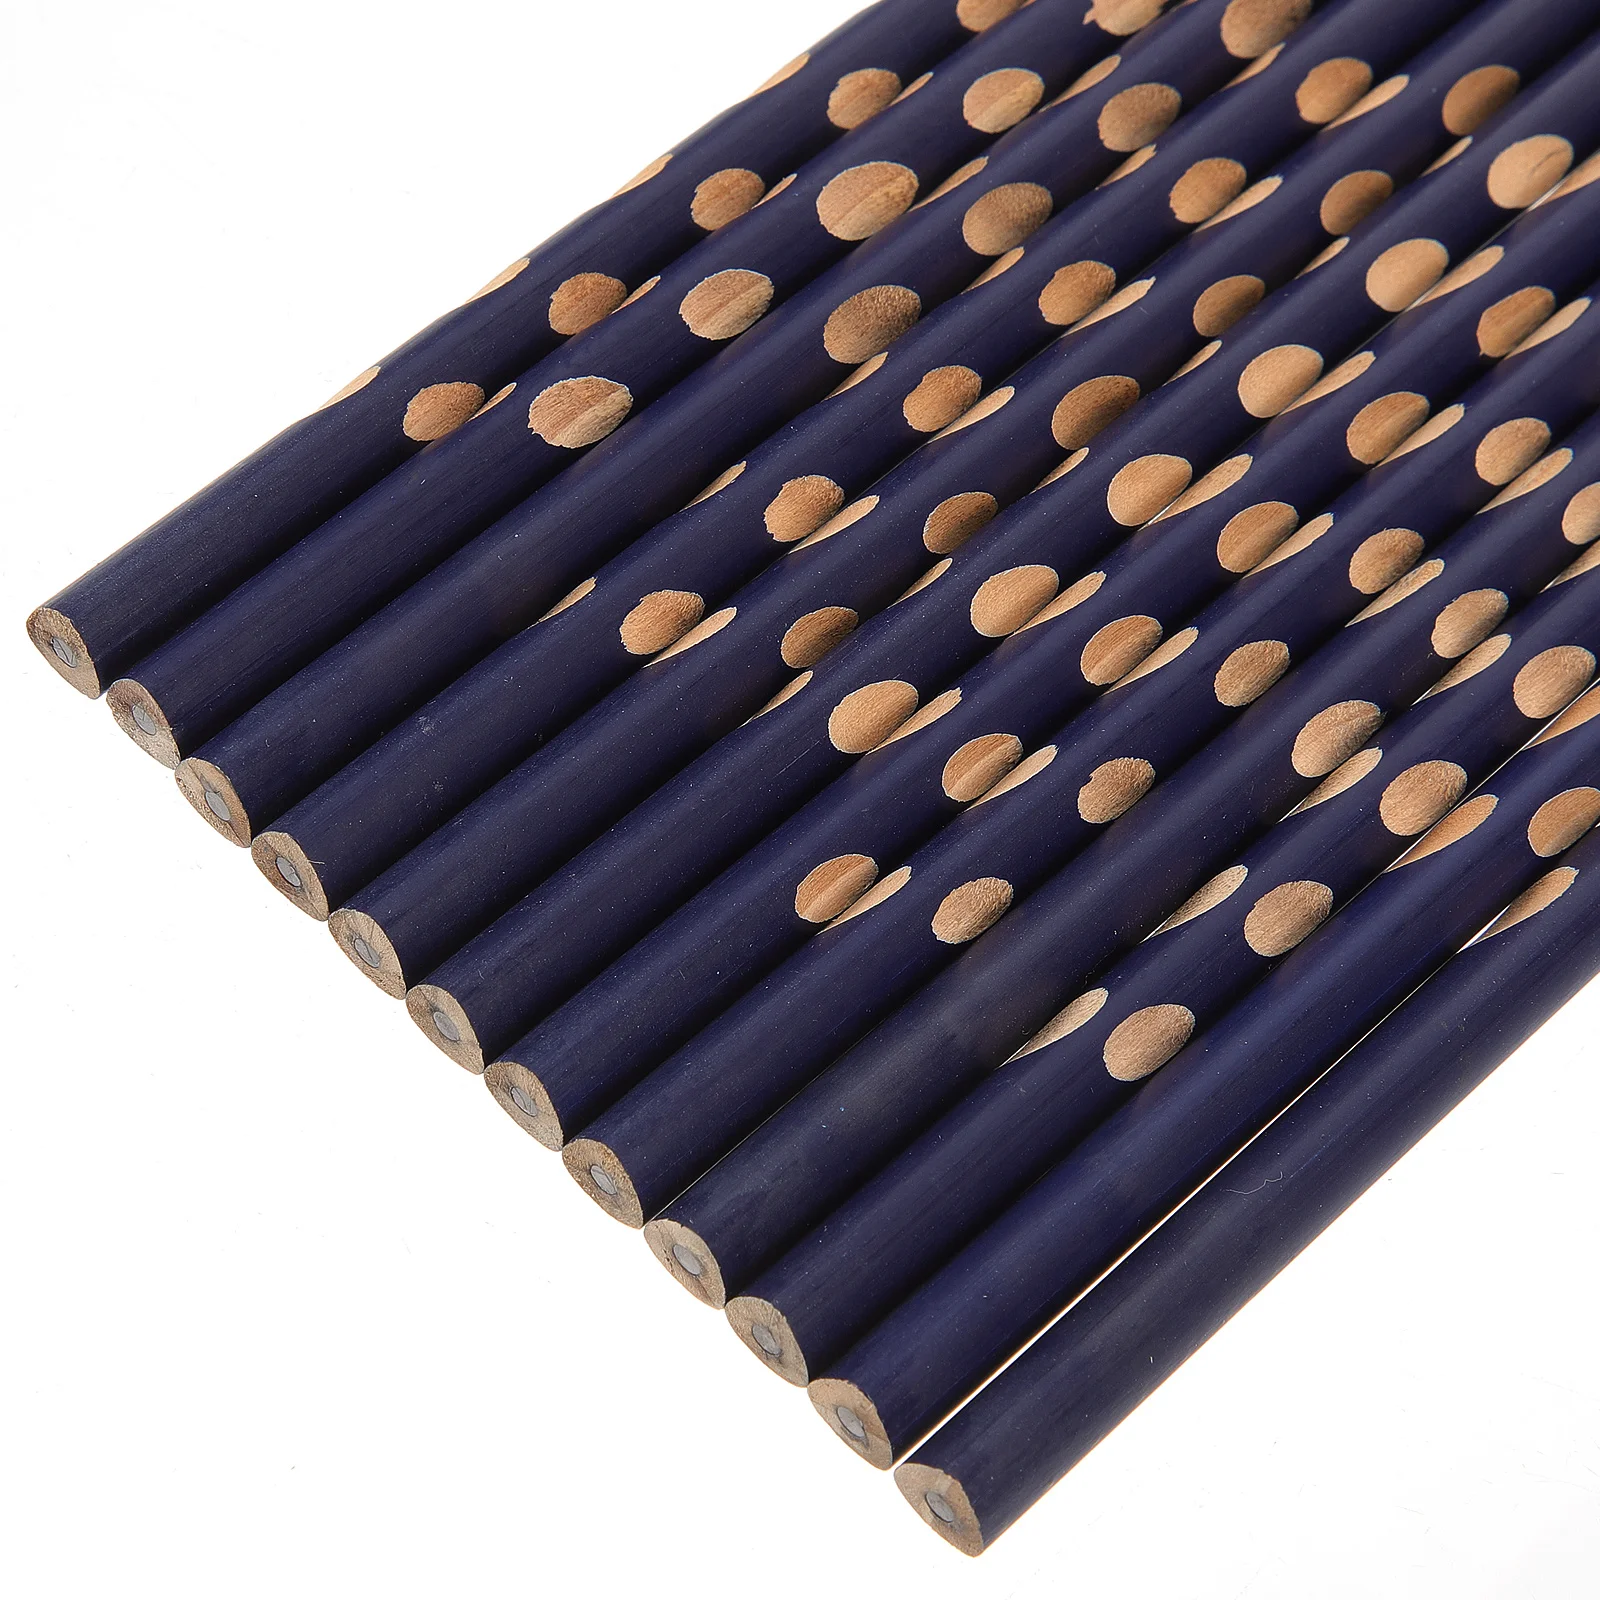 

12pcs Triangle Holes Pencil Correction Writing Posture Pencil School Office Stationery (Blue)